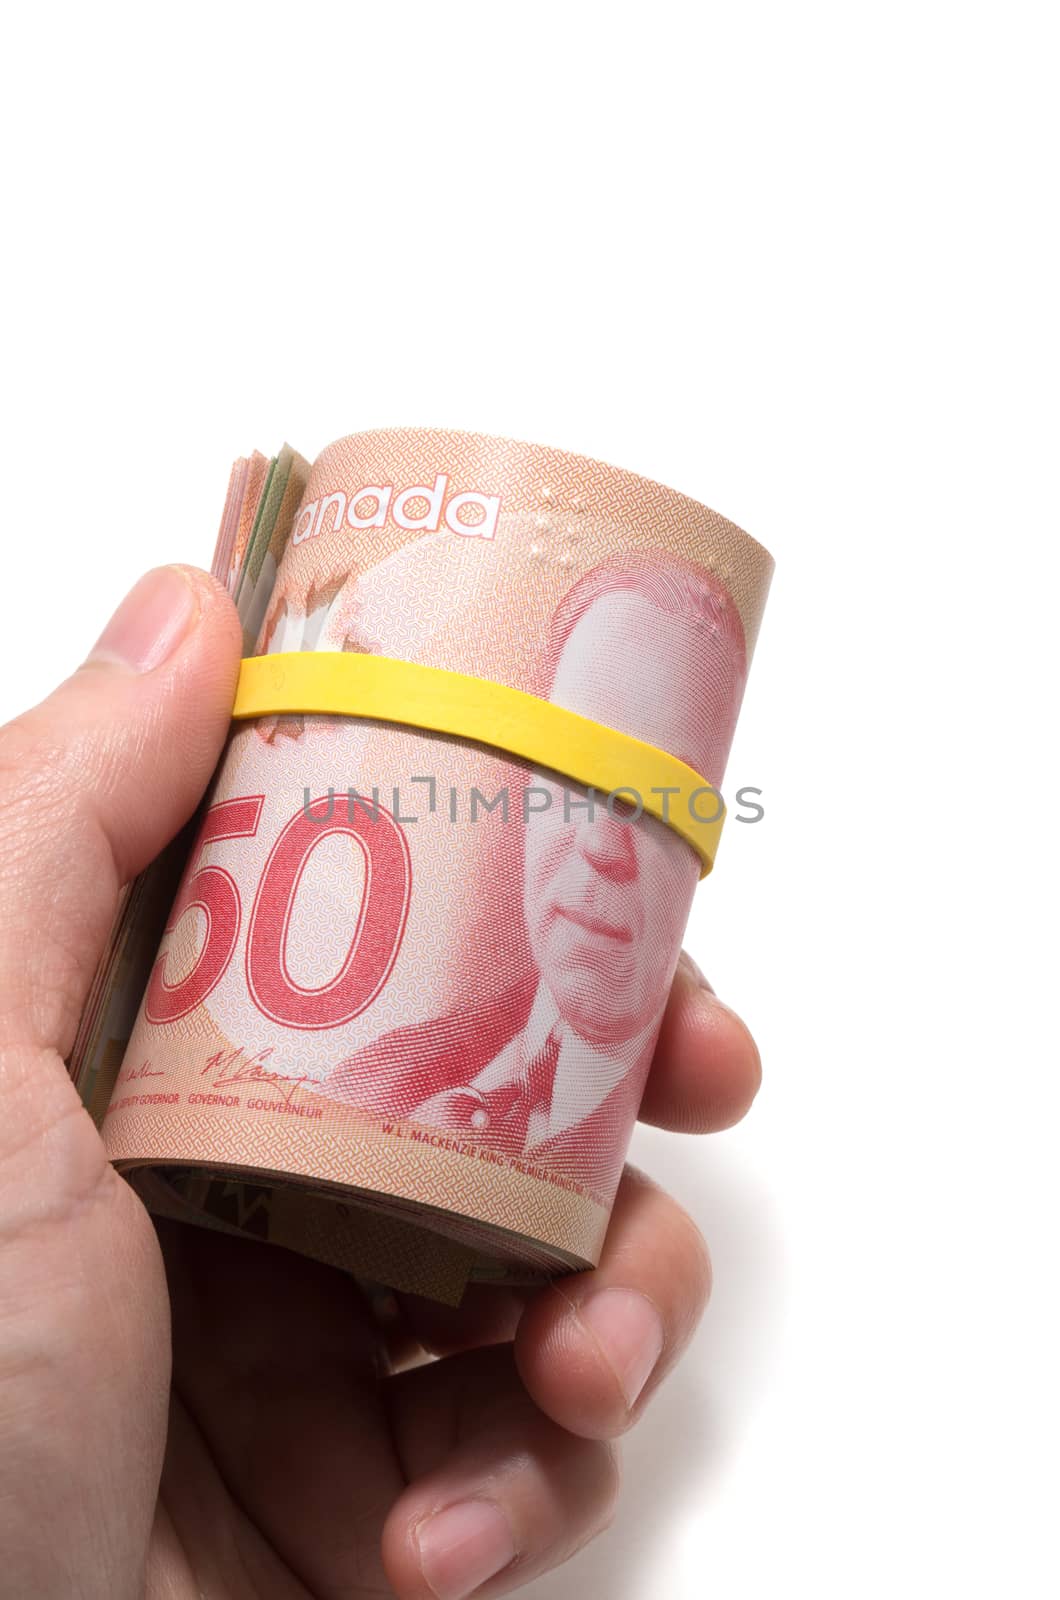 Hand holding a roll of 50 dollars Canadian with yellow plastic b by daoleduc